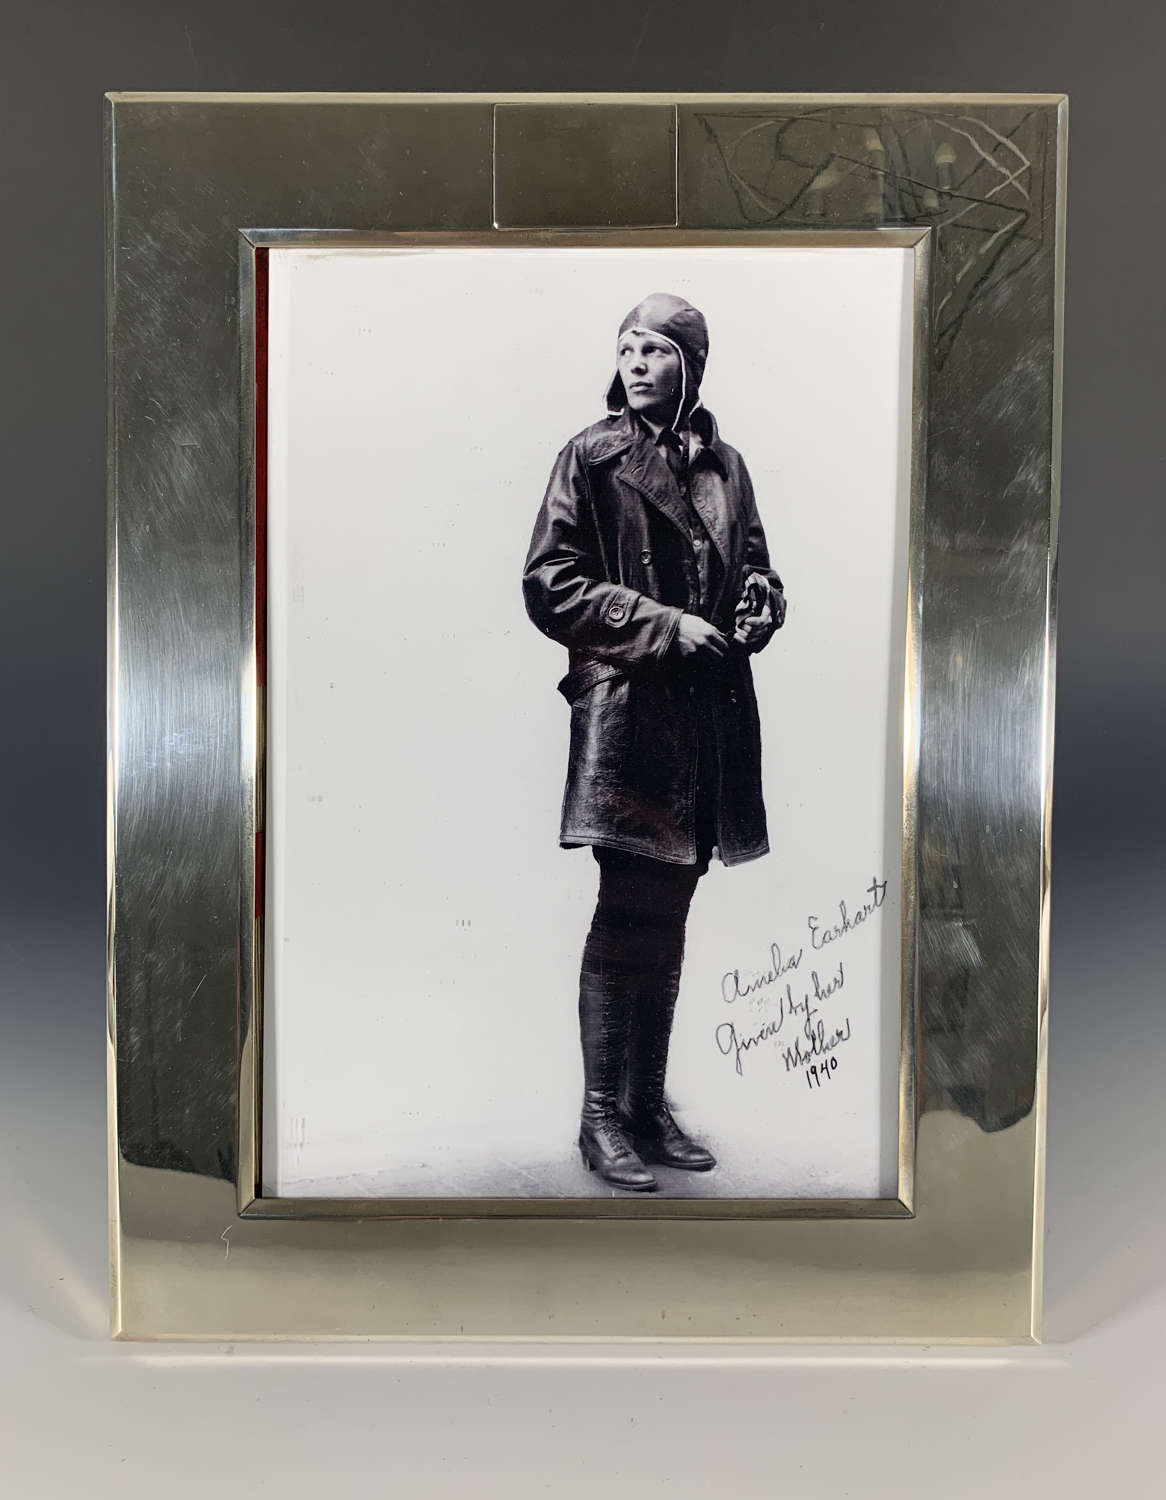 A very large sterling silver photograph frame by Sebastian Garrard